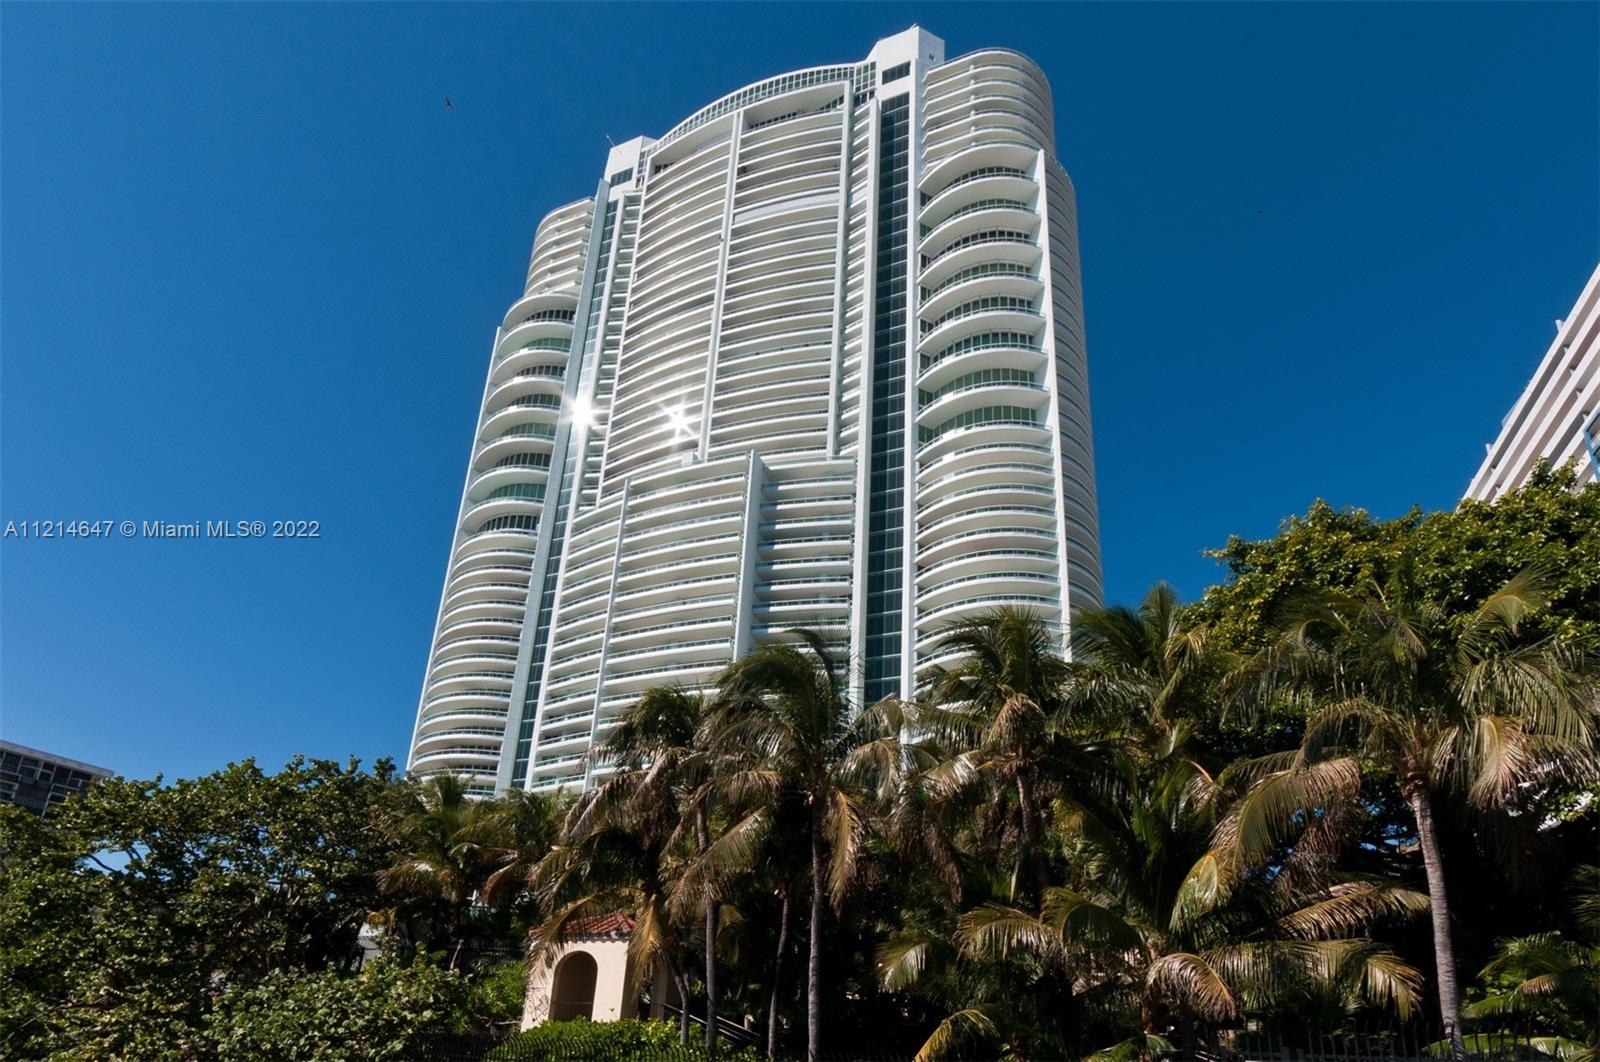 Spectacular over-sized & upgraded residence on desirable “03 line” at the Santa Maria, only line where all rooms have a bay front exposure. This masterpiece located on the 26th floor (highest floor for 2 & 3 bed units at the Santa Maria), offers higher ceilings than any unit located on lower floors. Also featuring 2,180 sqft of living area, private elevator & foyer, marble floors in social areas & wood floors in bedrooms, large open kitchen with island & top grade appliances, Culligan water filter system, electric solar shades in social area, electric storm shutters, huge master bedroom with his & her walk-in closets plus linen closet, air conditioned storage unit, 2 parking spaces, 441 sqft of expansive terrace offering sweeping views of Biscayne Bay, Key Biscayne & the Atlantic Ocean.